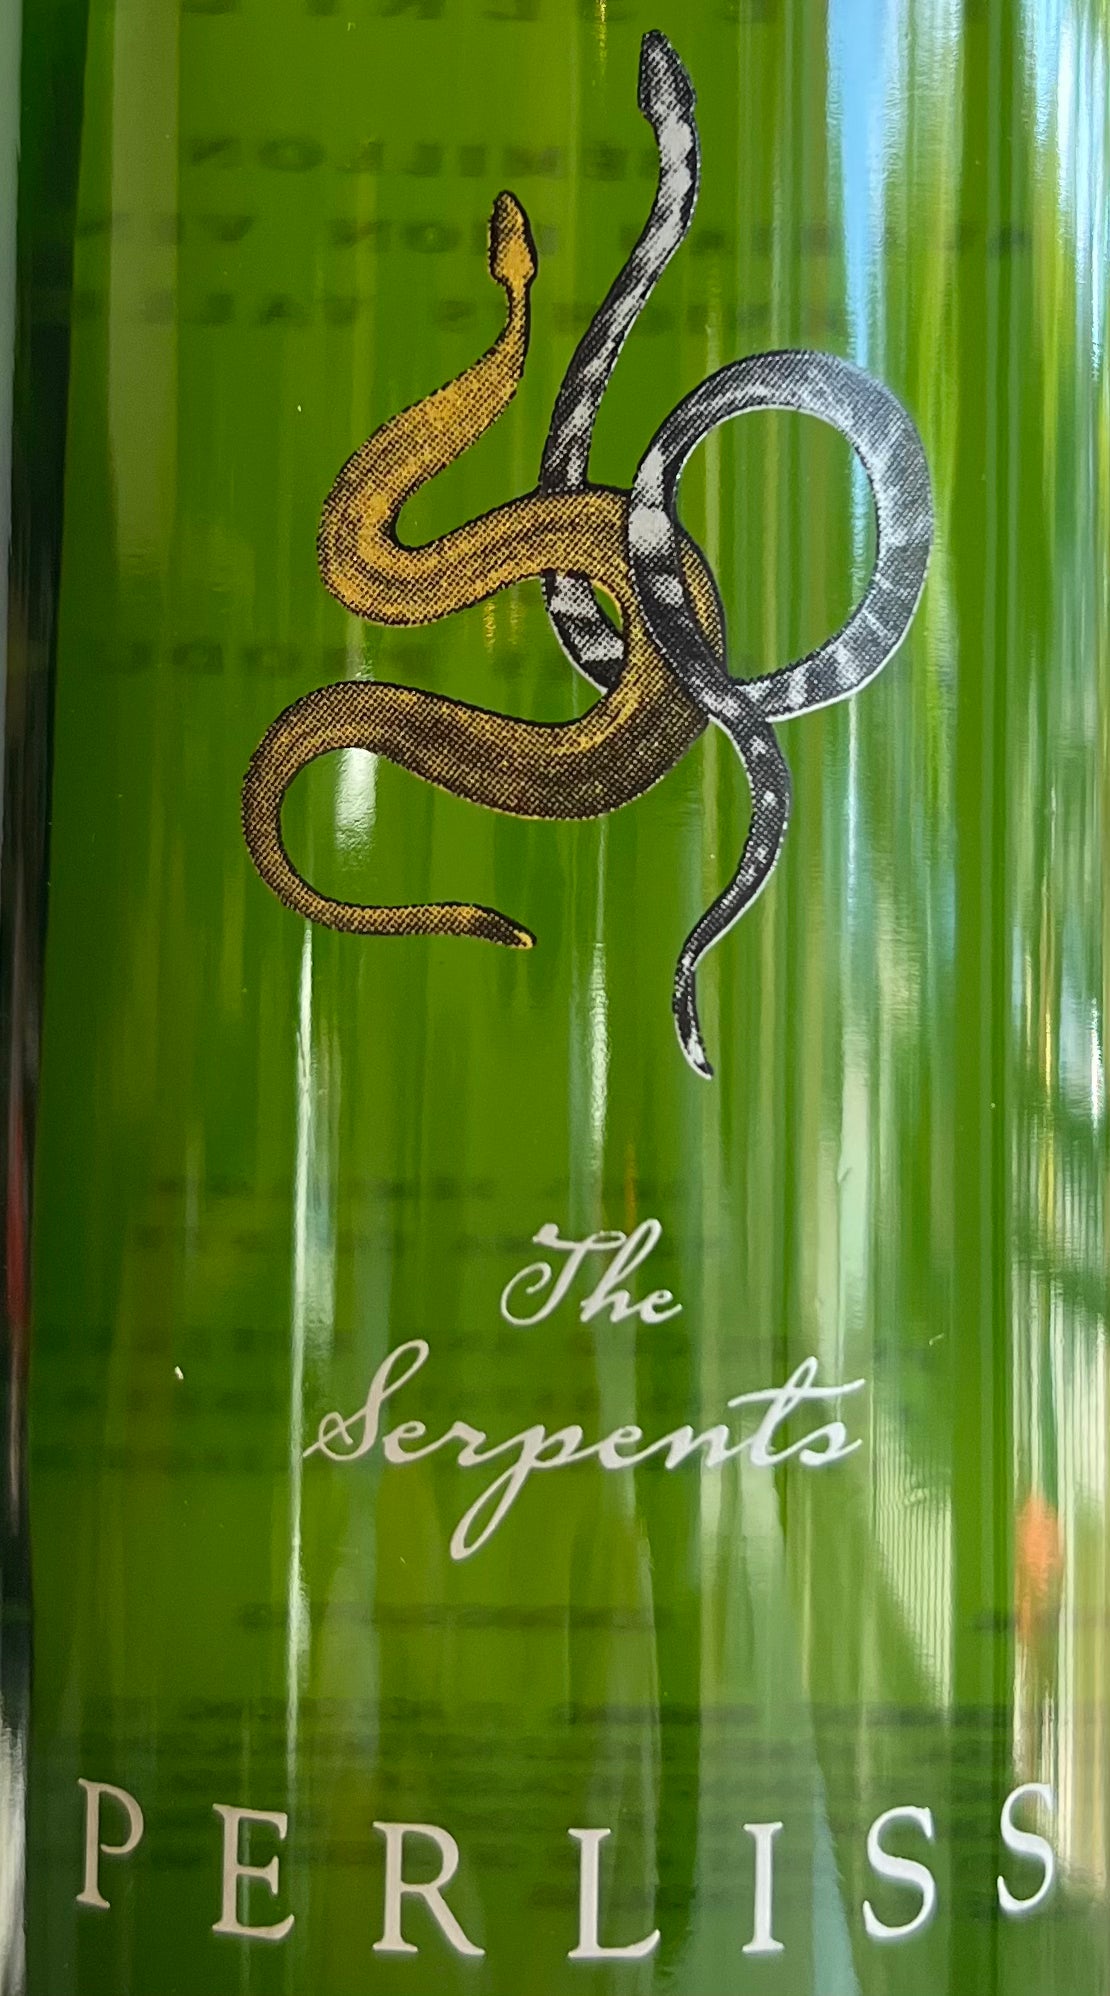 Perliss 'The Serpents' - 2018